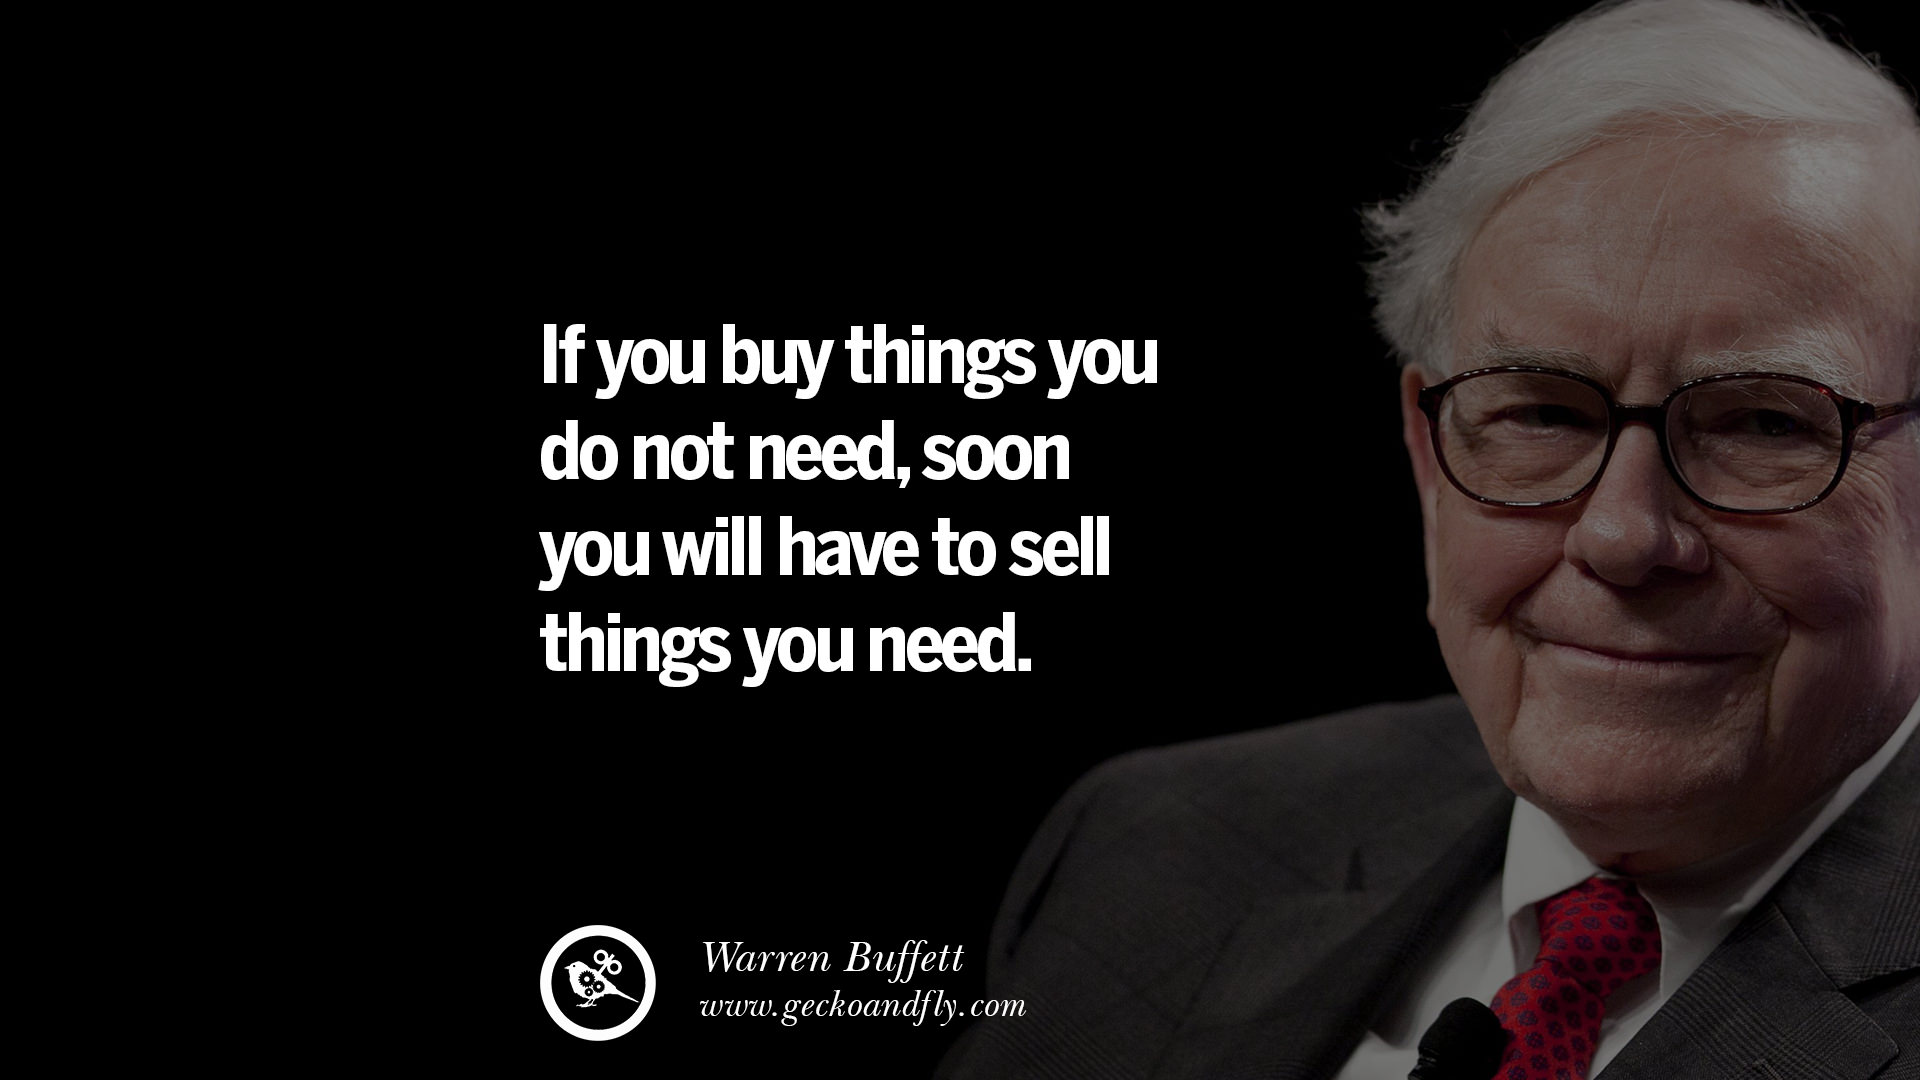 12 Best Warren Buffett Quotes On Investment, Life And Making Money